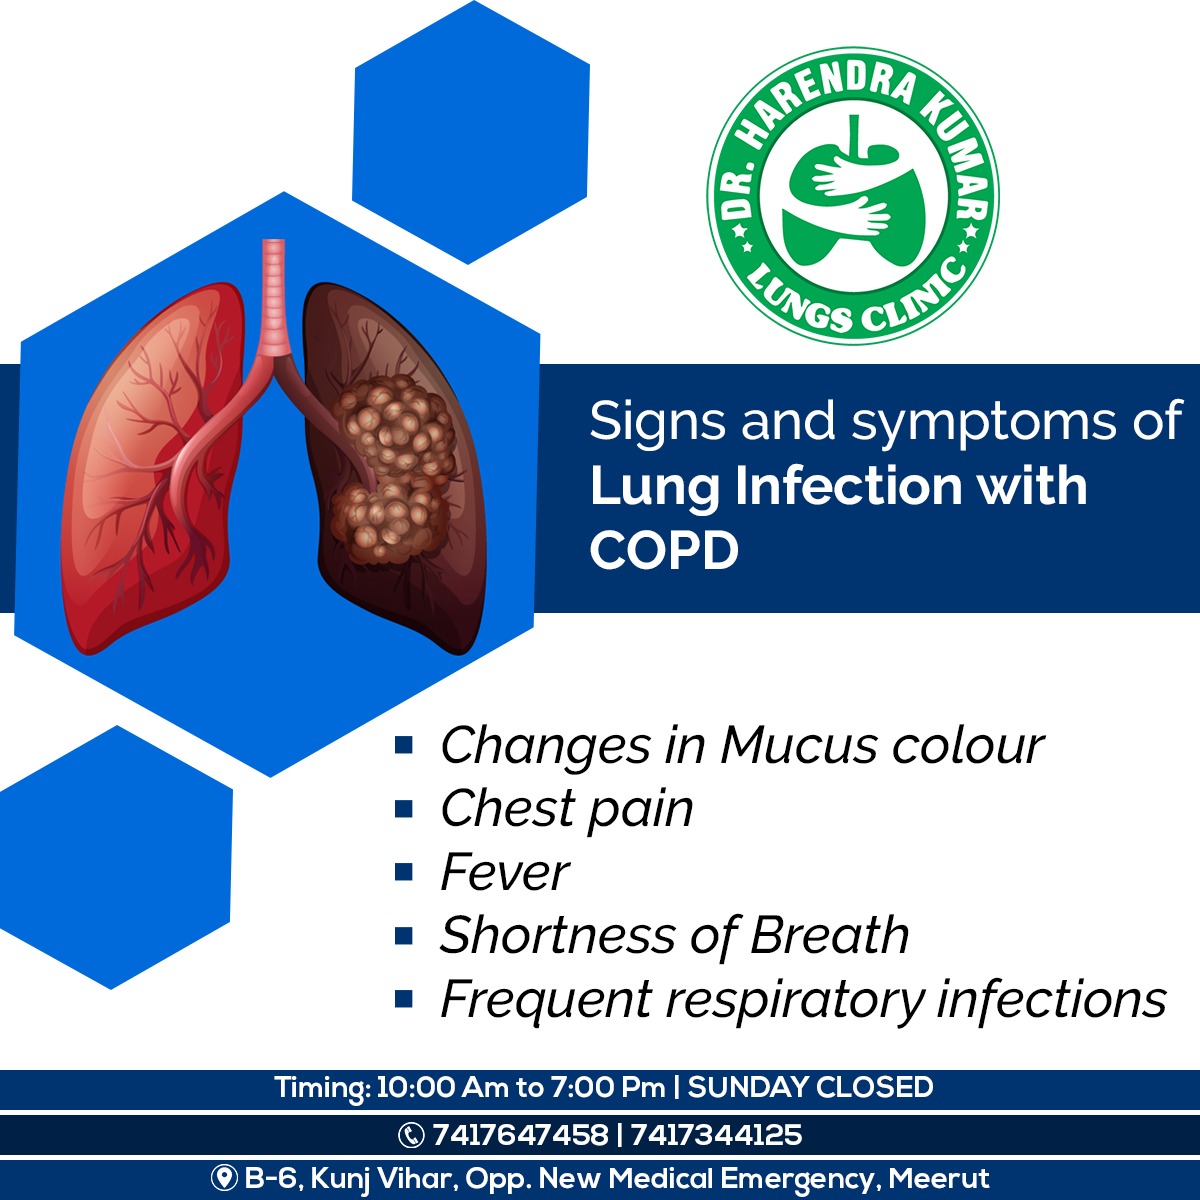 COPD is a chronic inflammatory lung disease which if left untreated might get worse with the progress of time. 

#LungsSpecialist #CopdTreatment #COPDsymptoms #COPD #Asthma #lungsdisease #PFT #Bronchoscopy #lungsdoctor #lungstreatment #LungsClinic #LungsClinicByDrHarendra